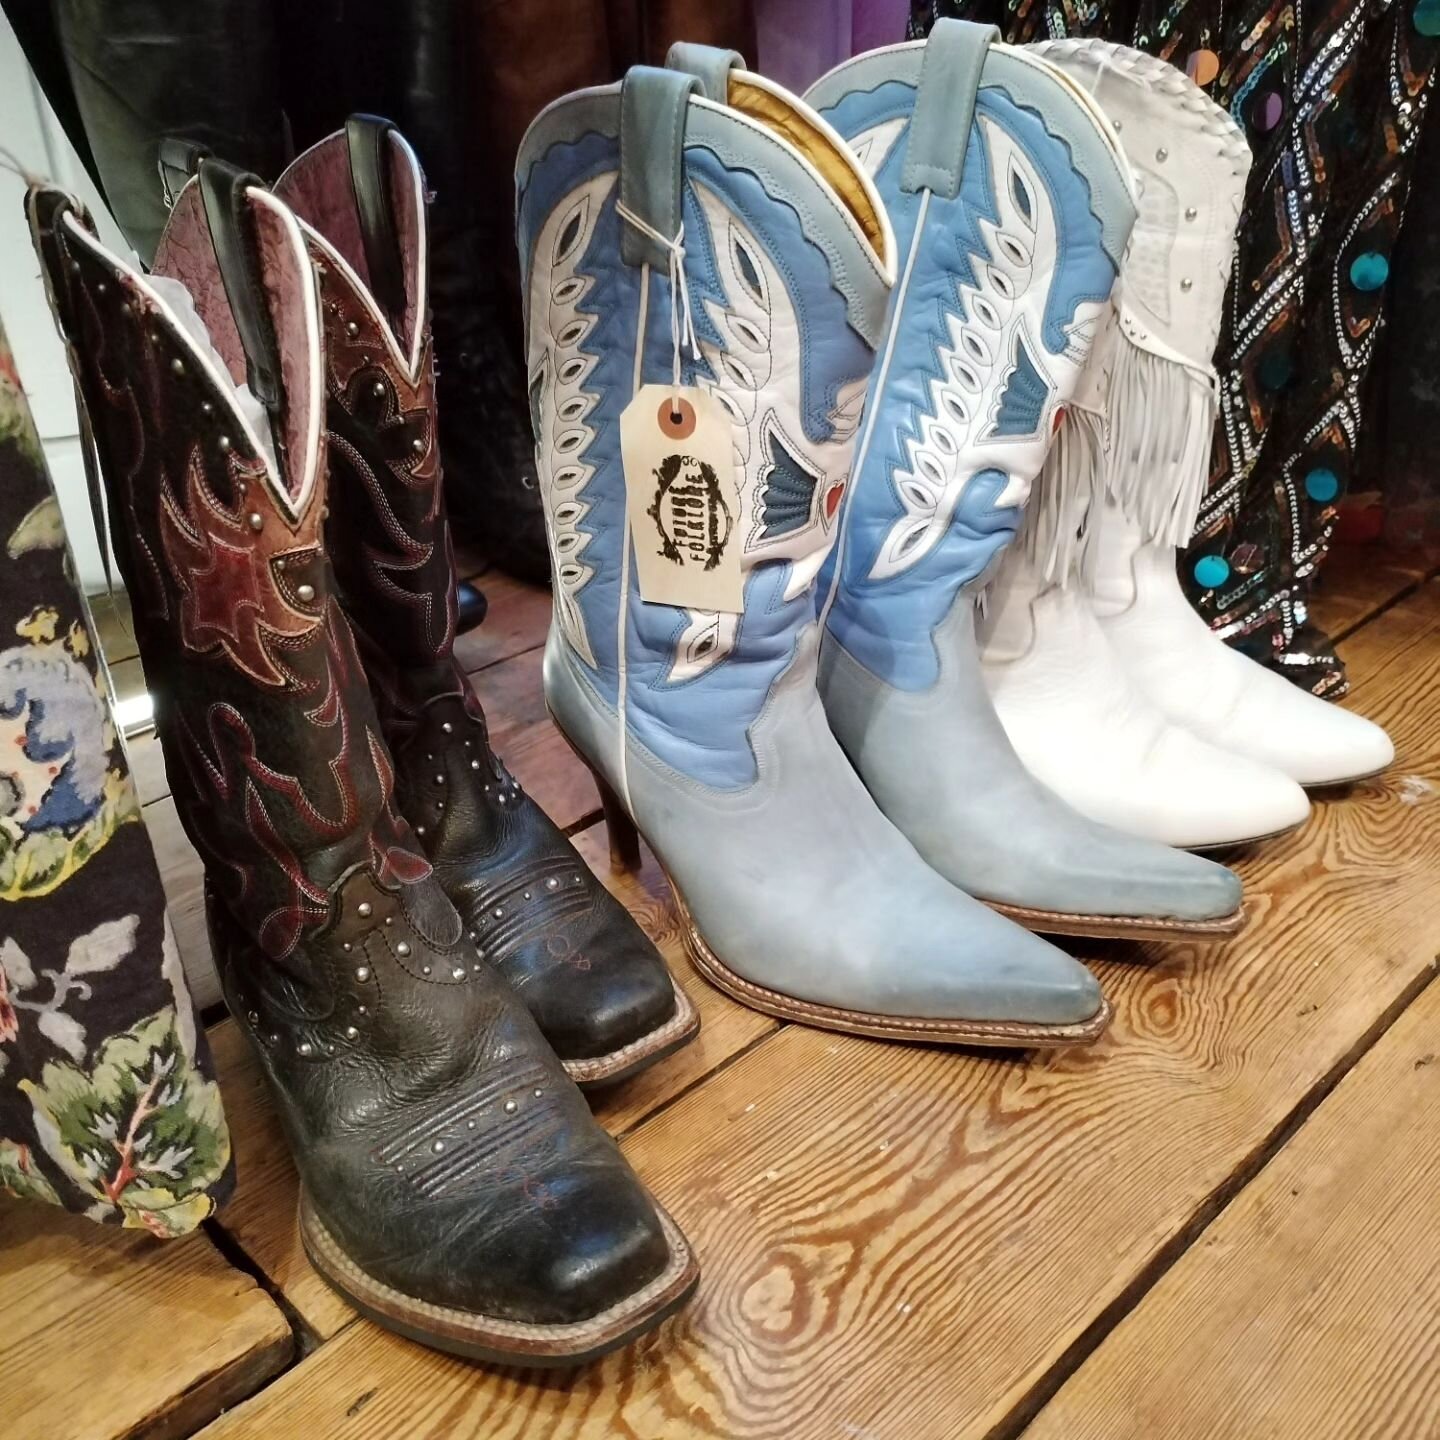 BOOTIFUL
Always a wonderful collection of footwear here at Snoopers Attic 🥾👠👢👟👞🥿👡

Gorgeous vintage cowboy boots, heels, mens dress shoes, workboots, platforms and 70s knee high boots... the list goes on and on..

#vintageshoes
#vintageboots
#